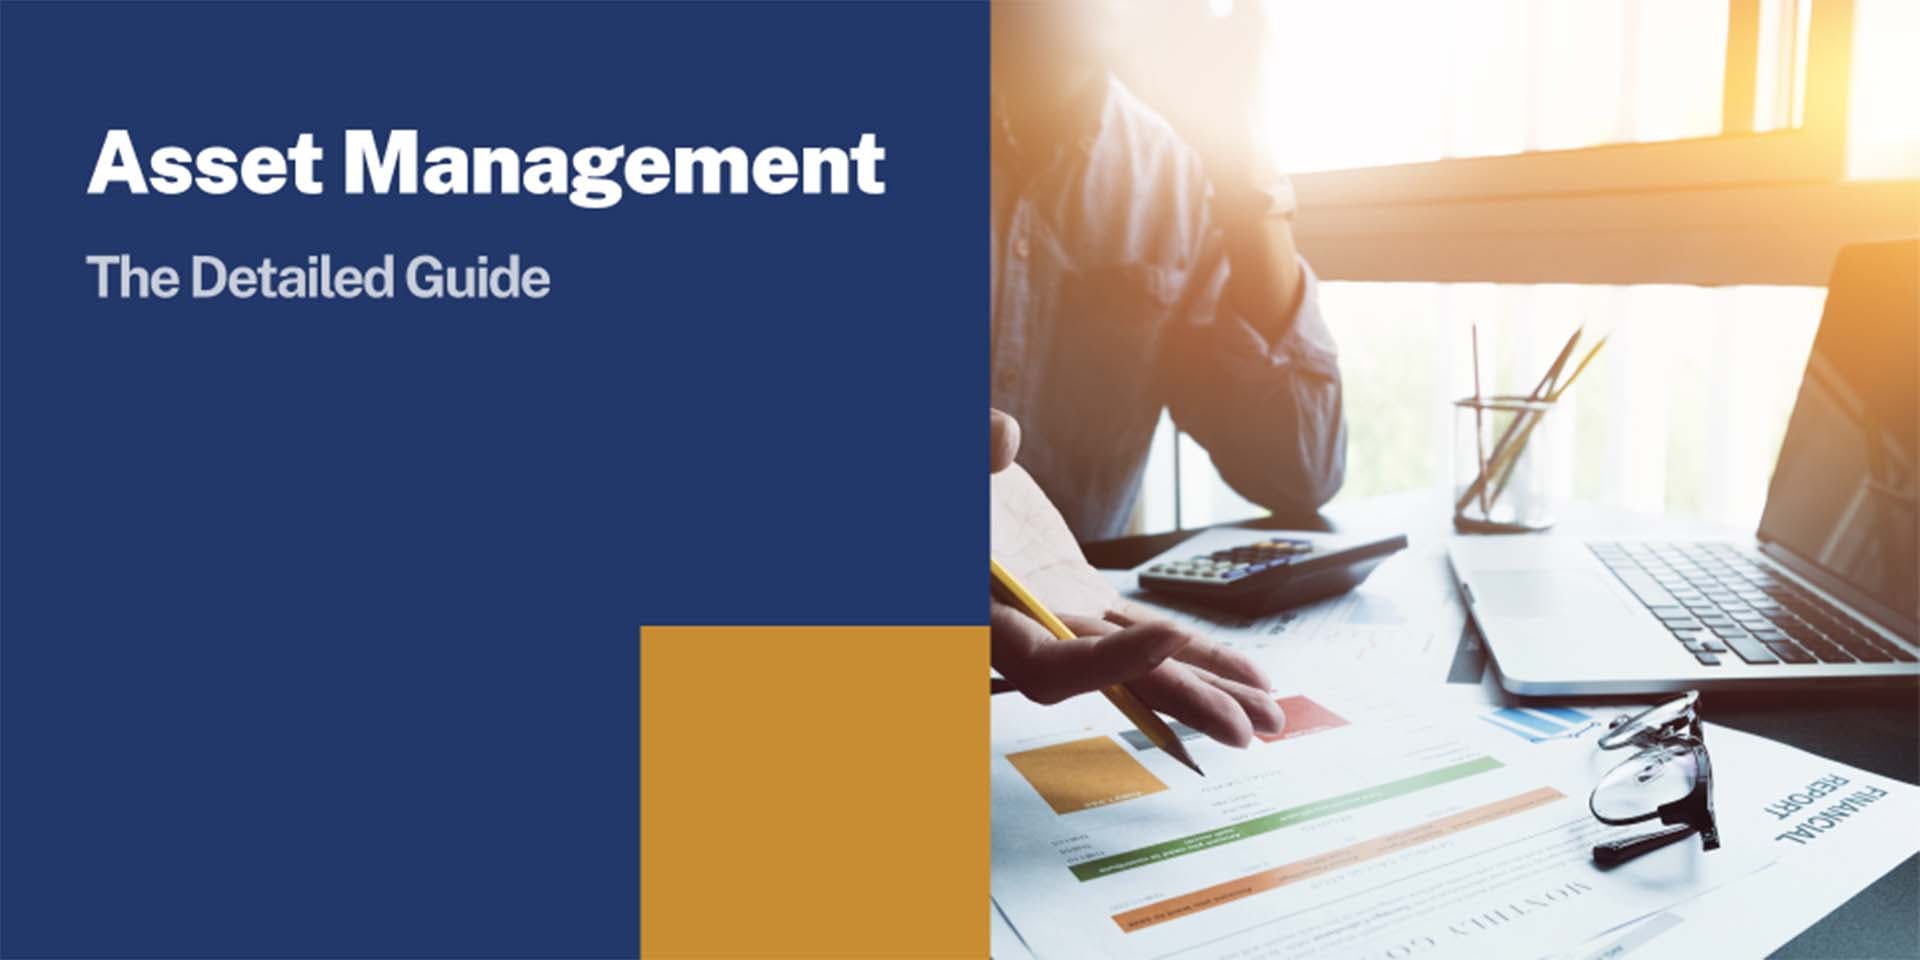 Asset Management: The Detailed Guide